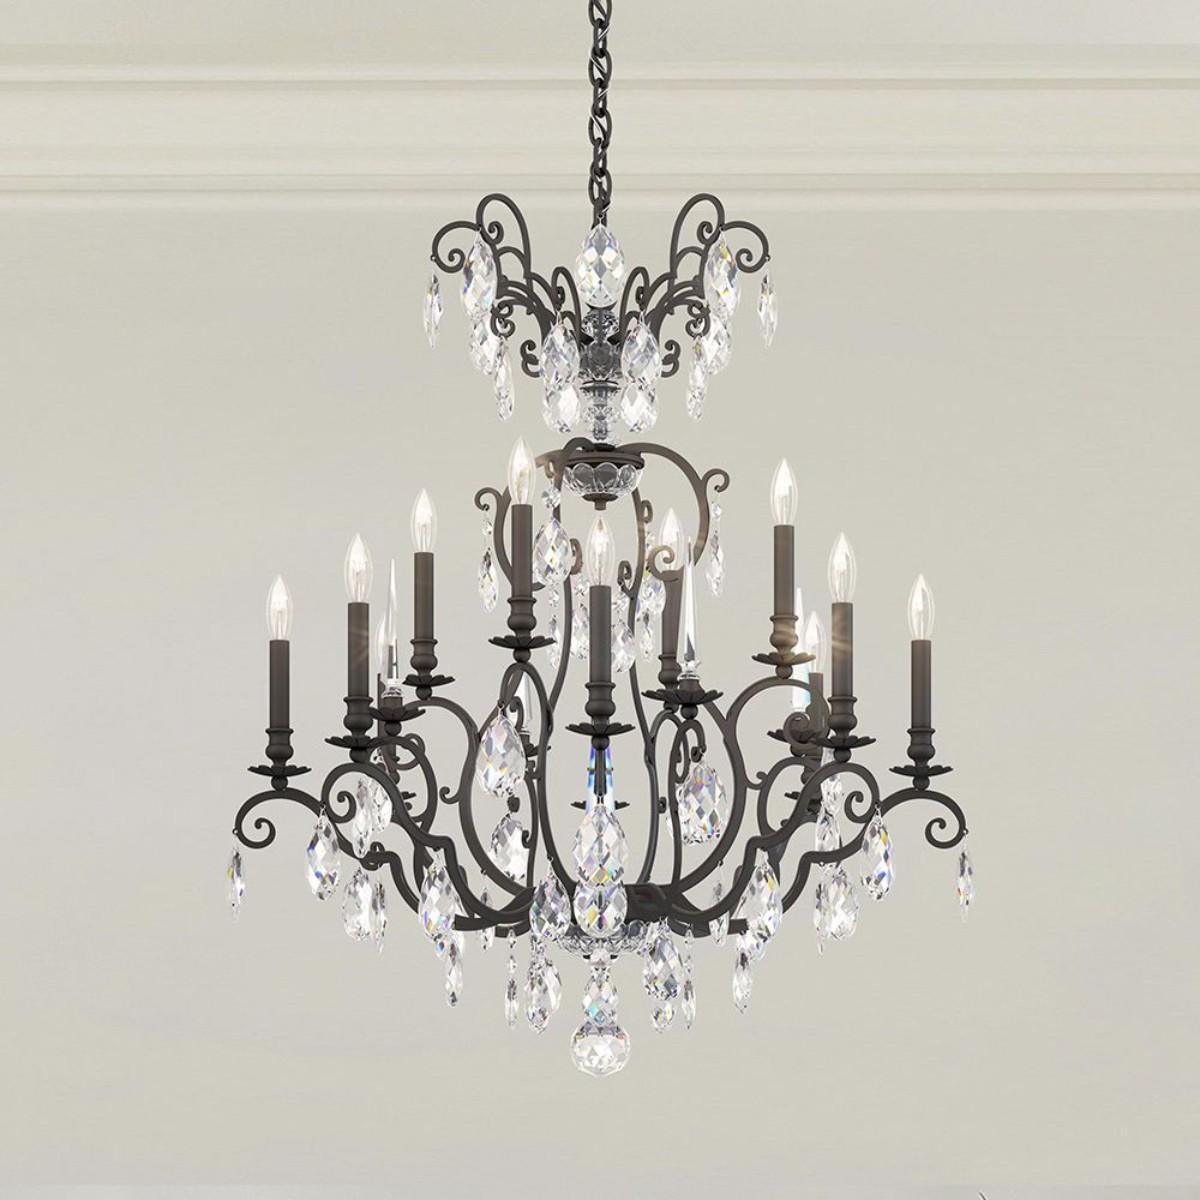 Renaissance Nouveau 12 Light Chandelier with Heritage Crystal - Bees Lighting